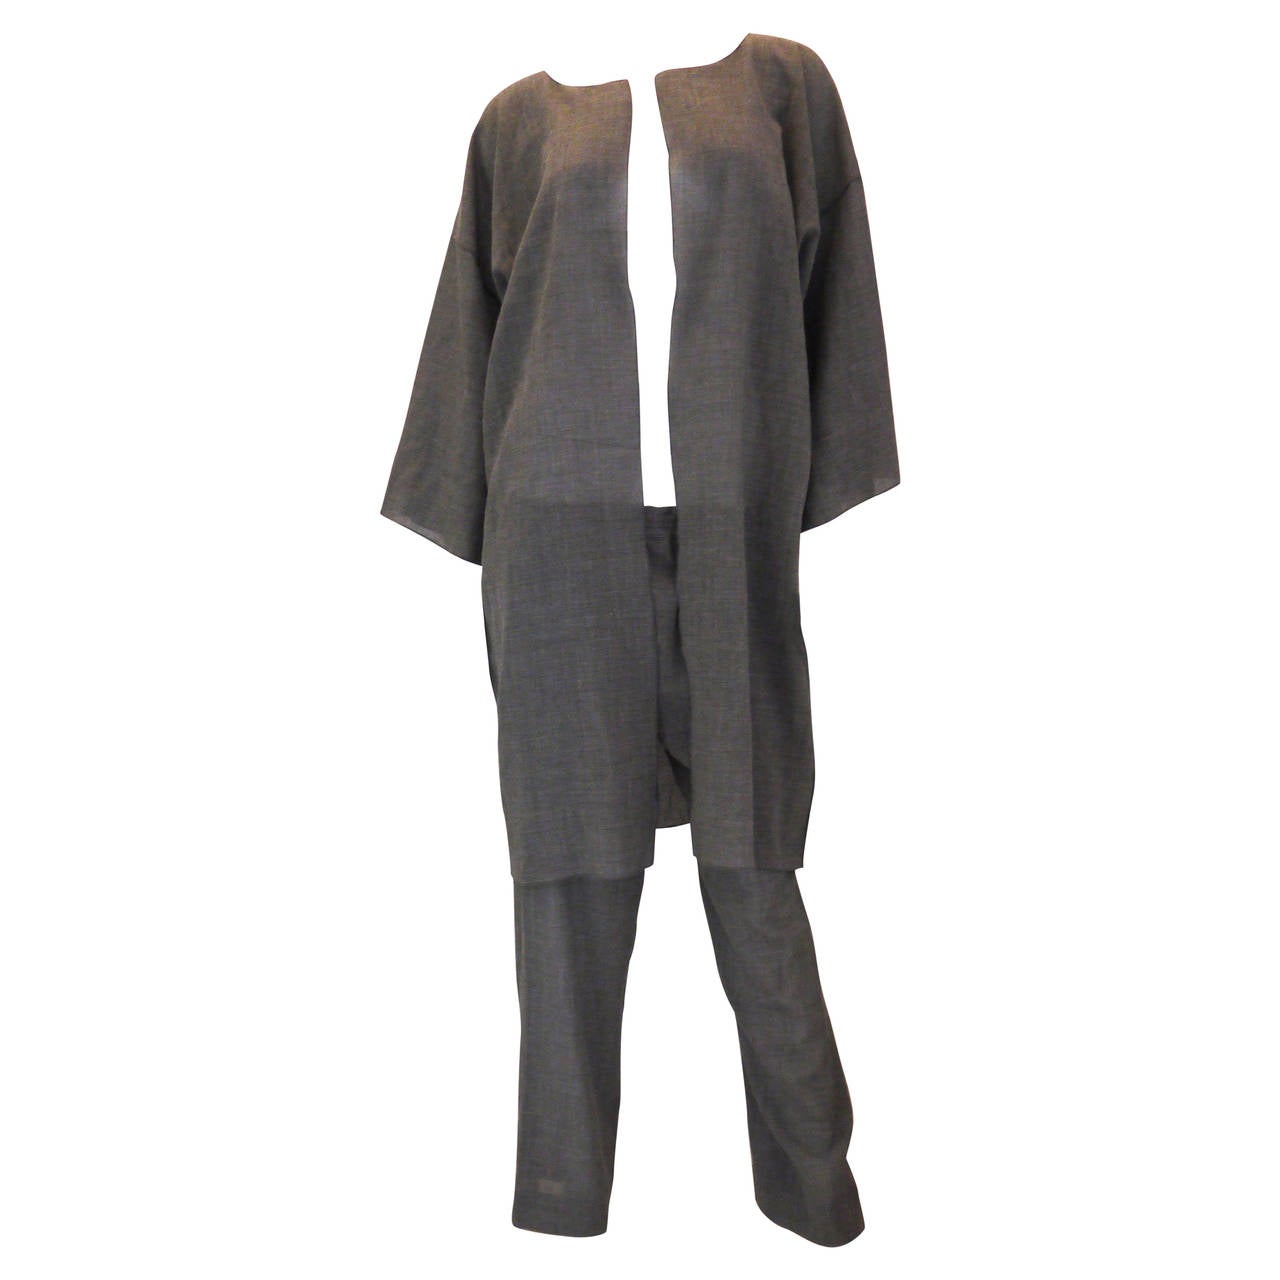 Zoran 2 Piece Suit - Top and Pants For Sale